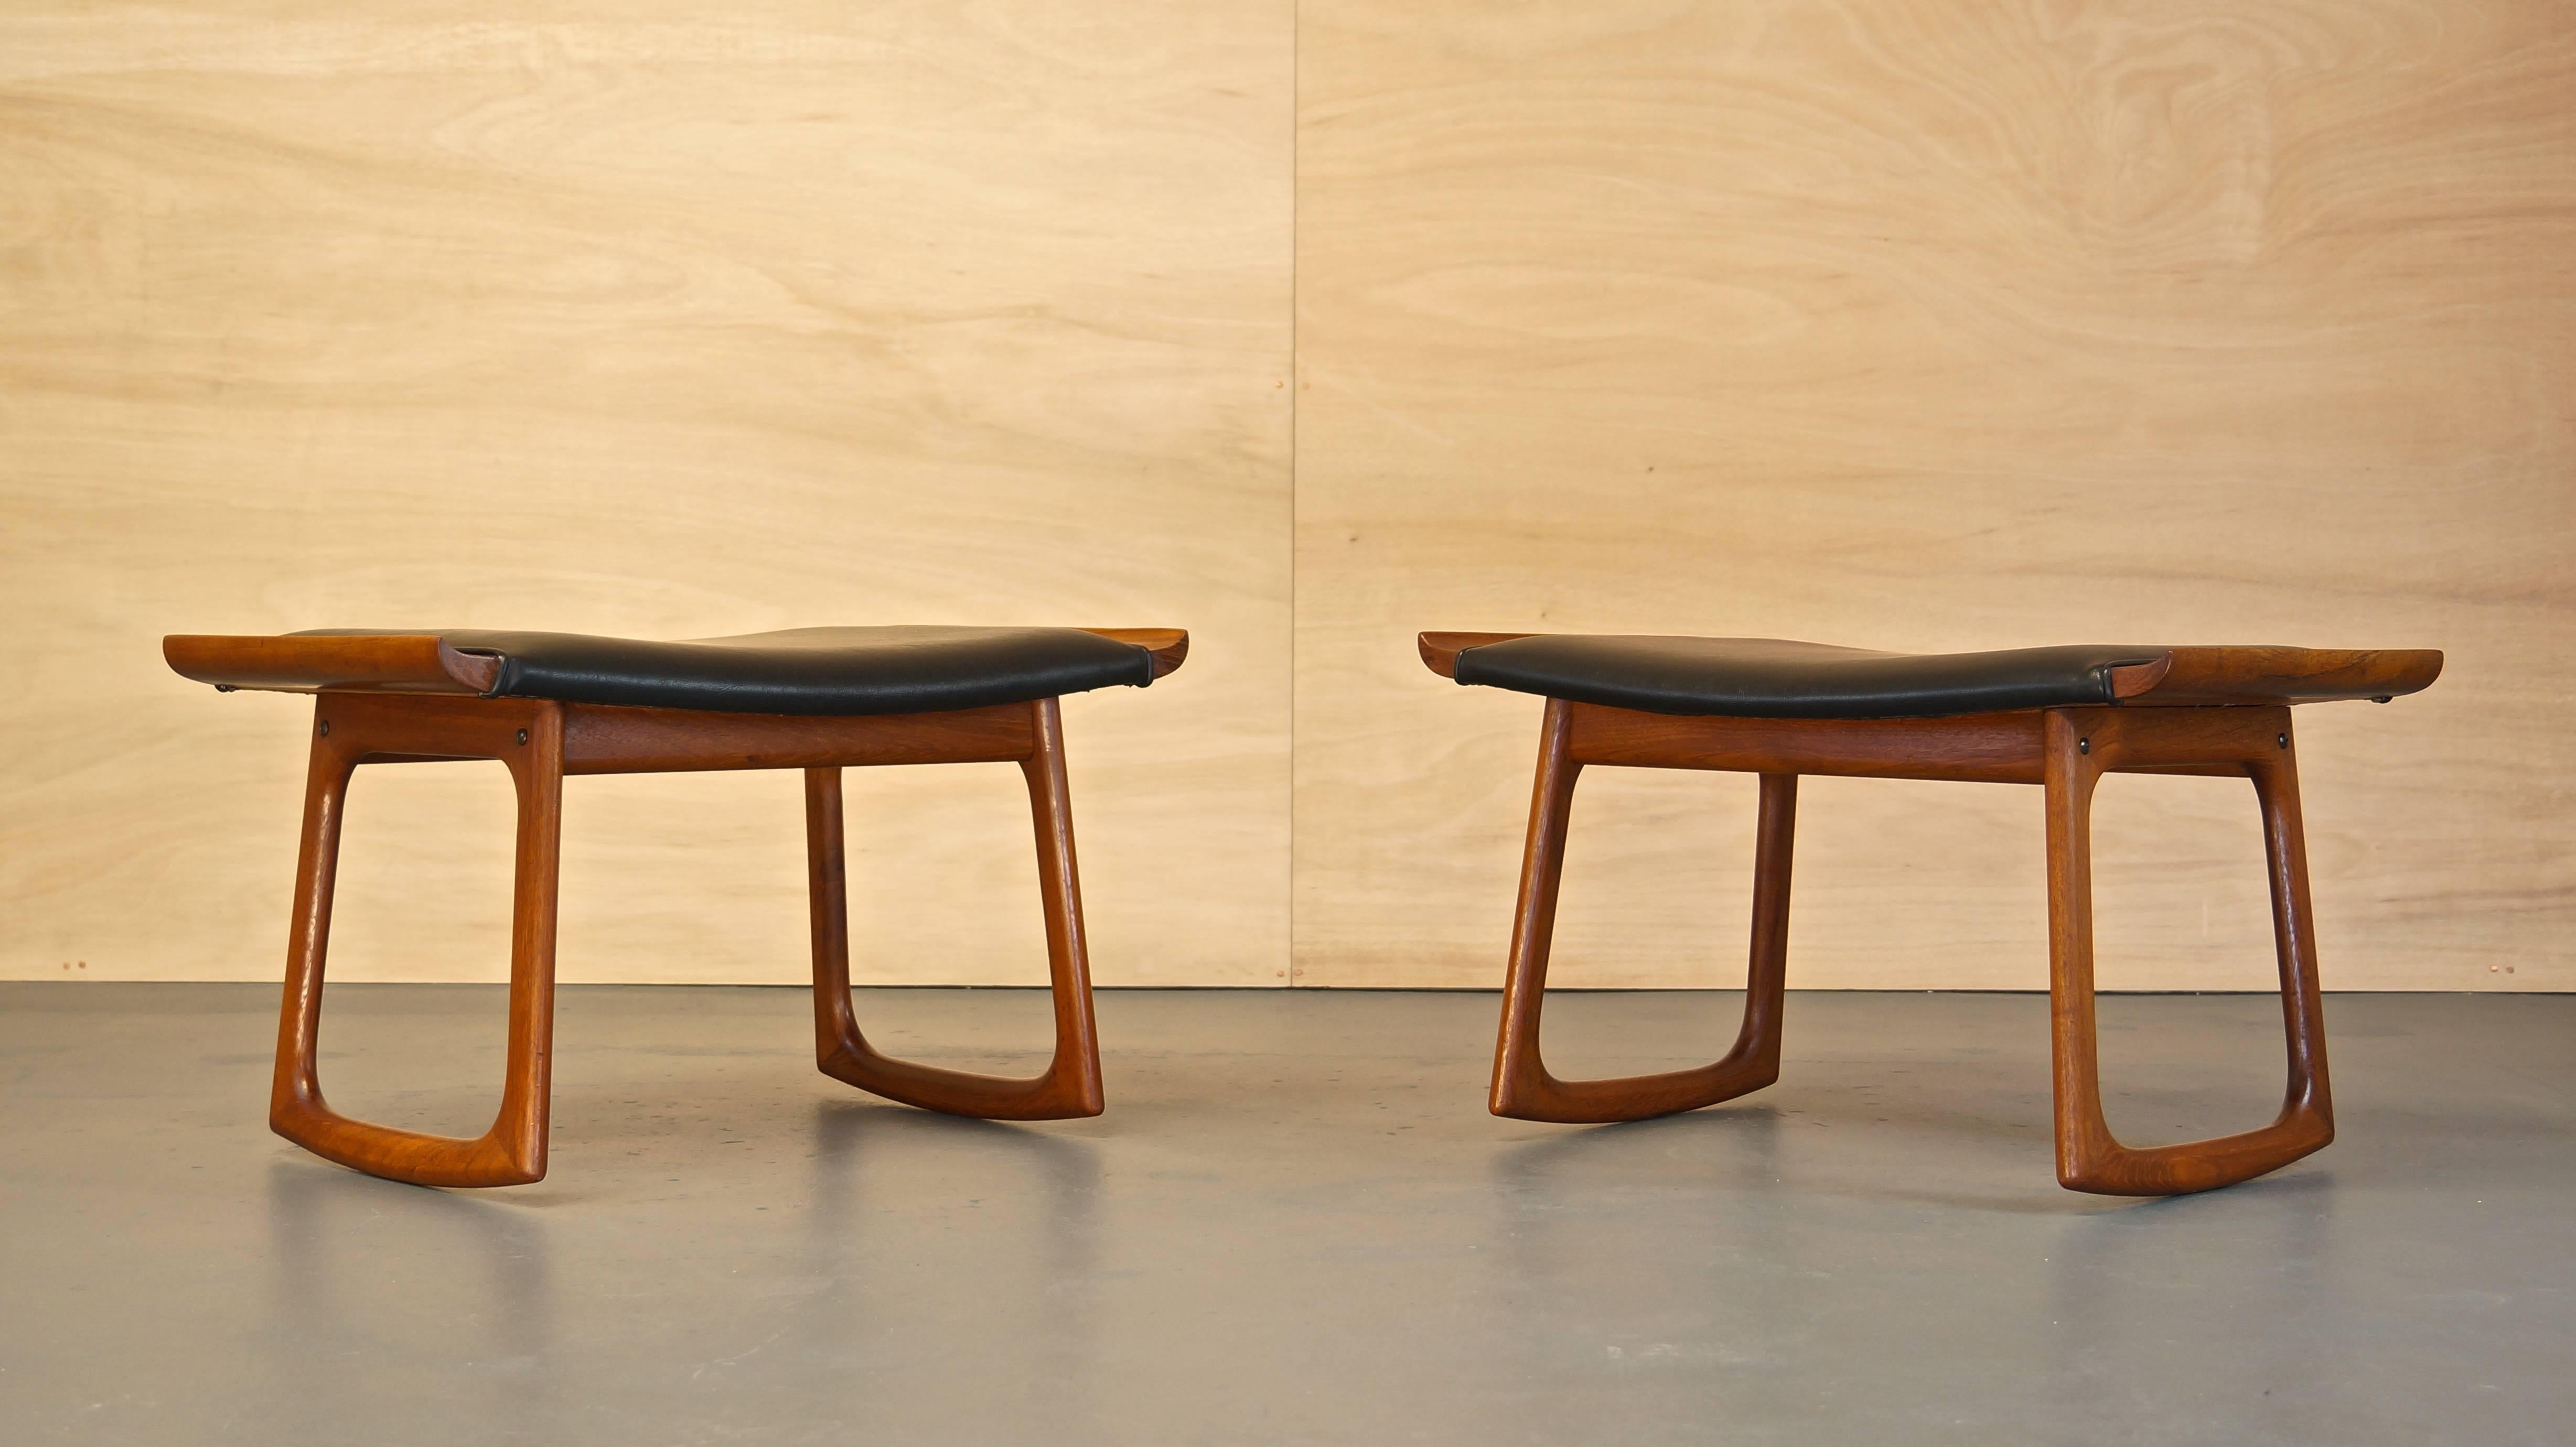 Pair of rare 1960s Mid-century Danish teak rocking ottomans/stools in the manner of Finn Juhl.

High quality construction and design throughout with its sculpted solid teak curved legs, winged seat edges and black naugahyde upholstery.

Metal